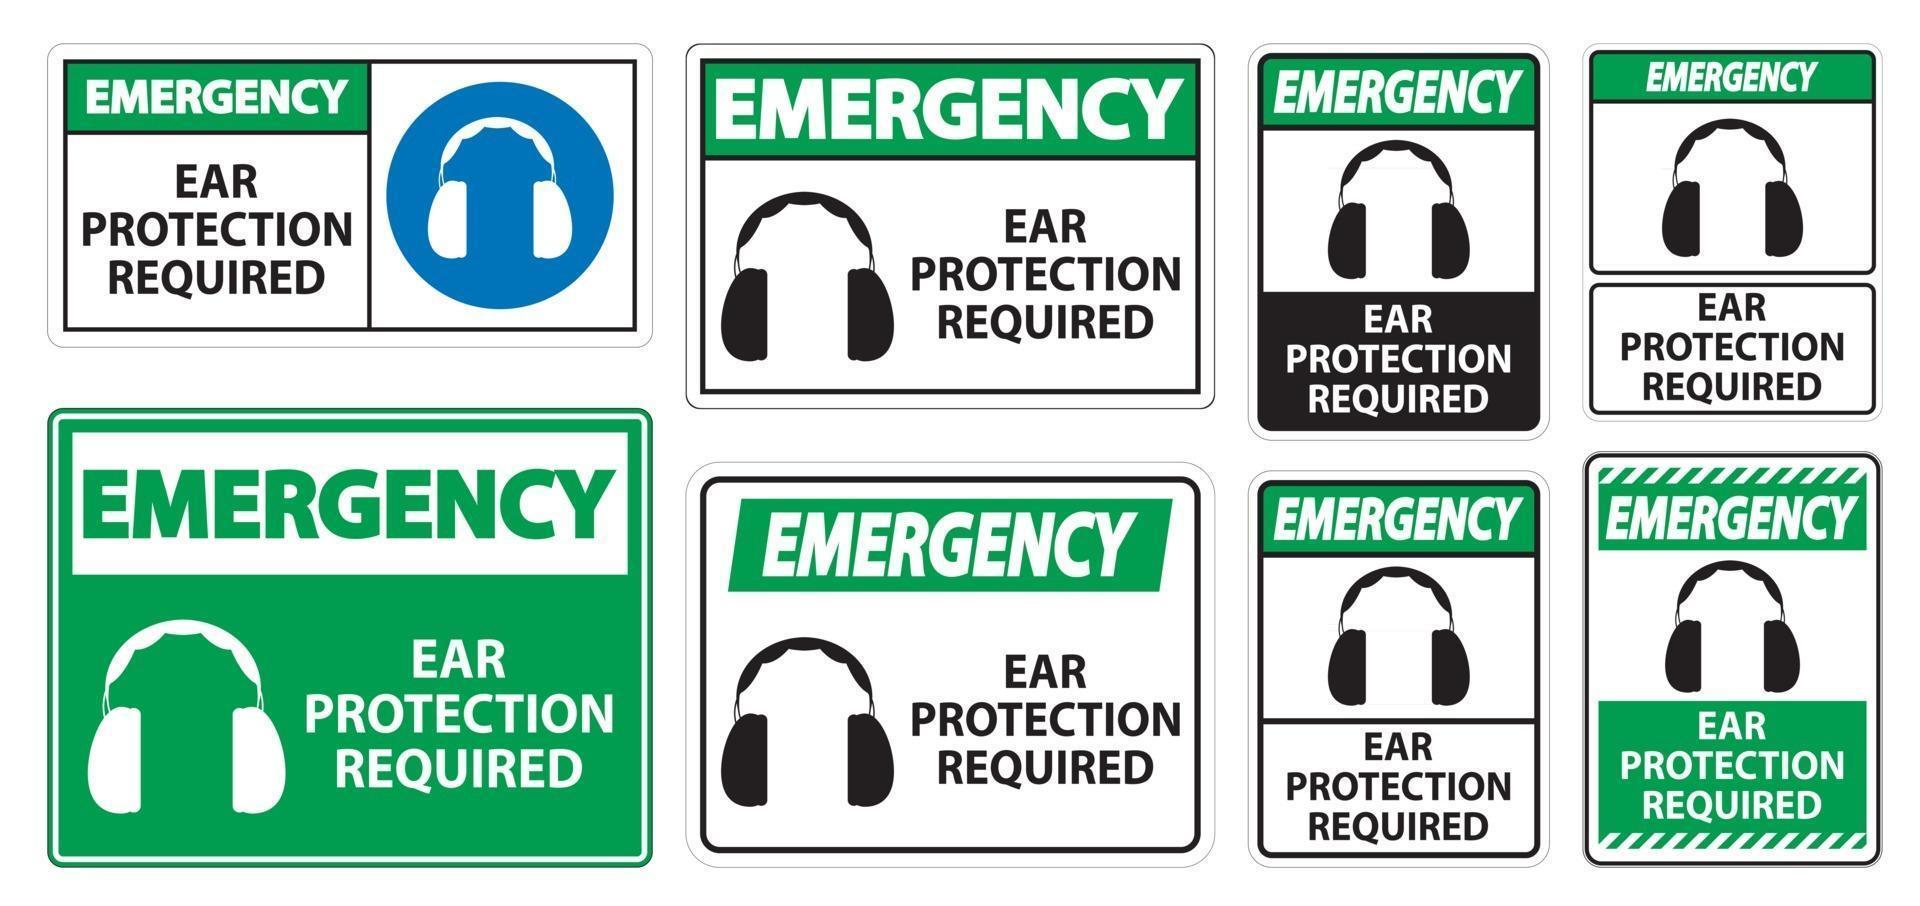 Emergency Ear Protection Required Symbol vector